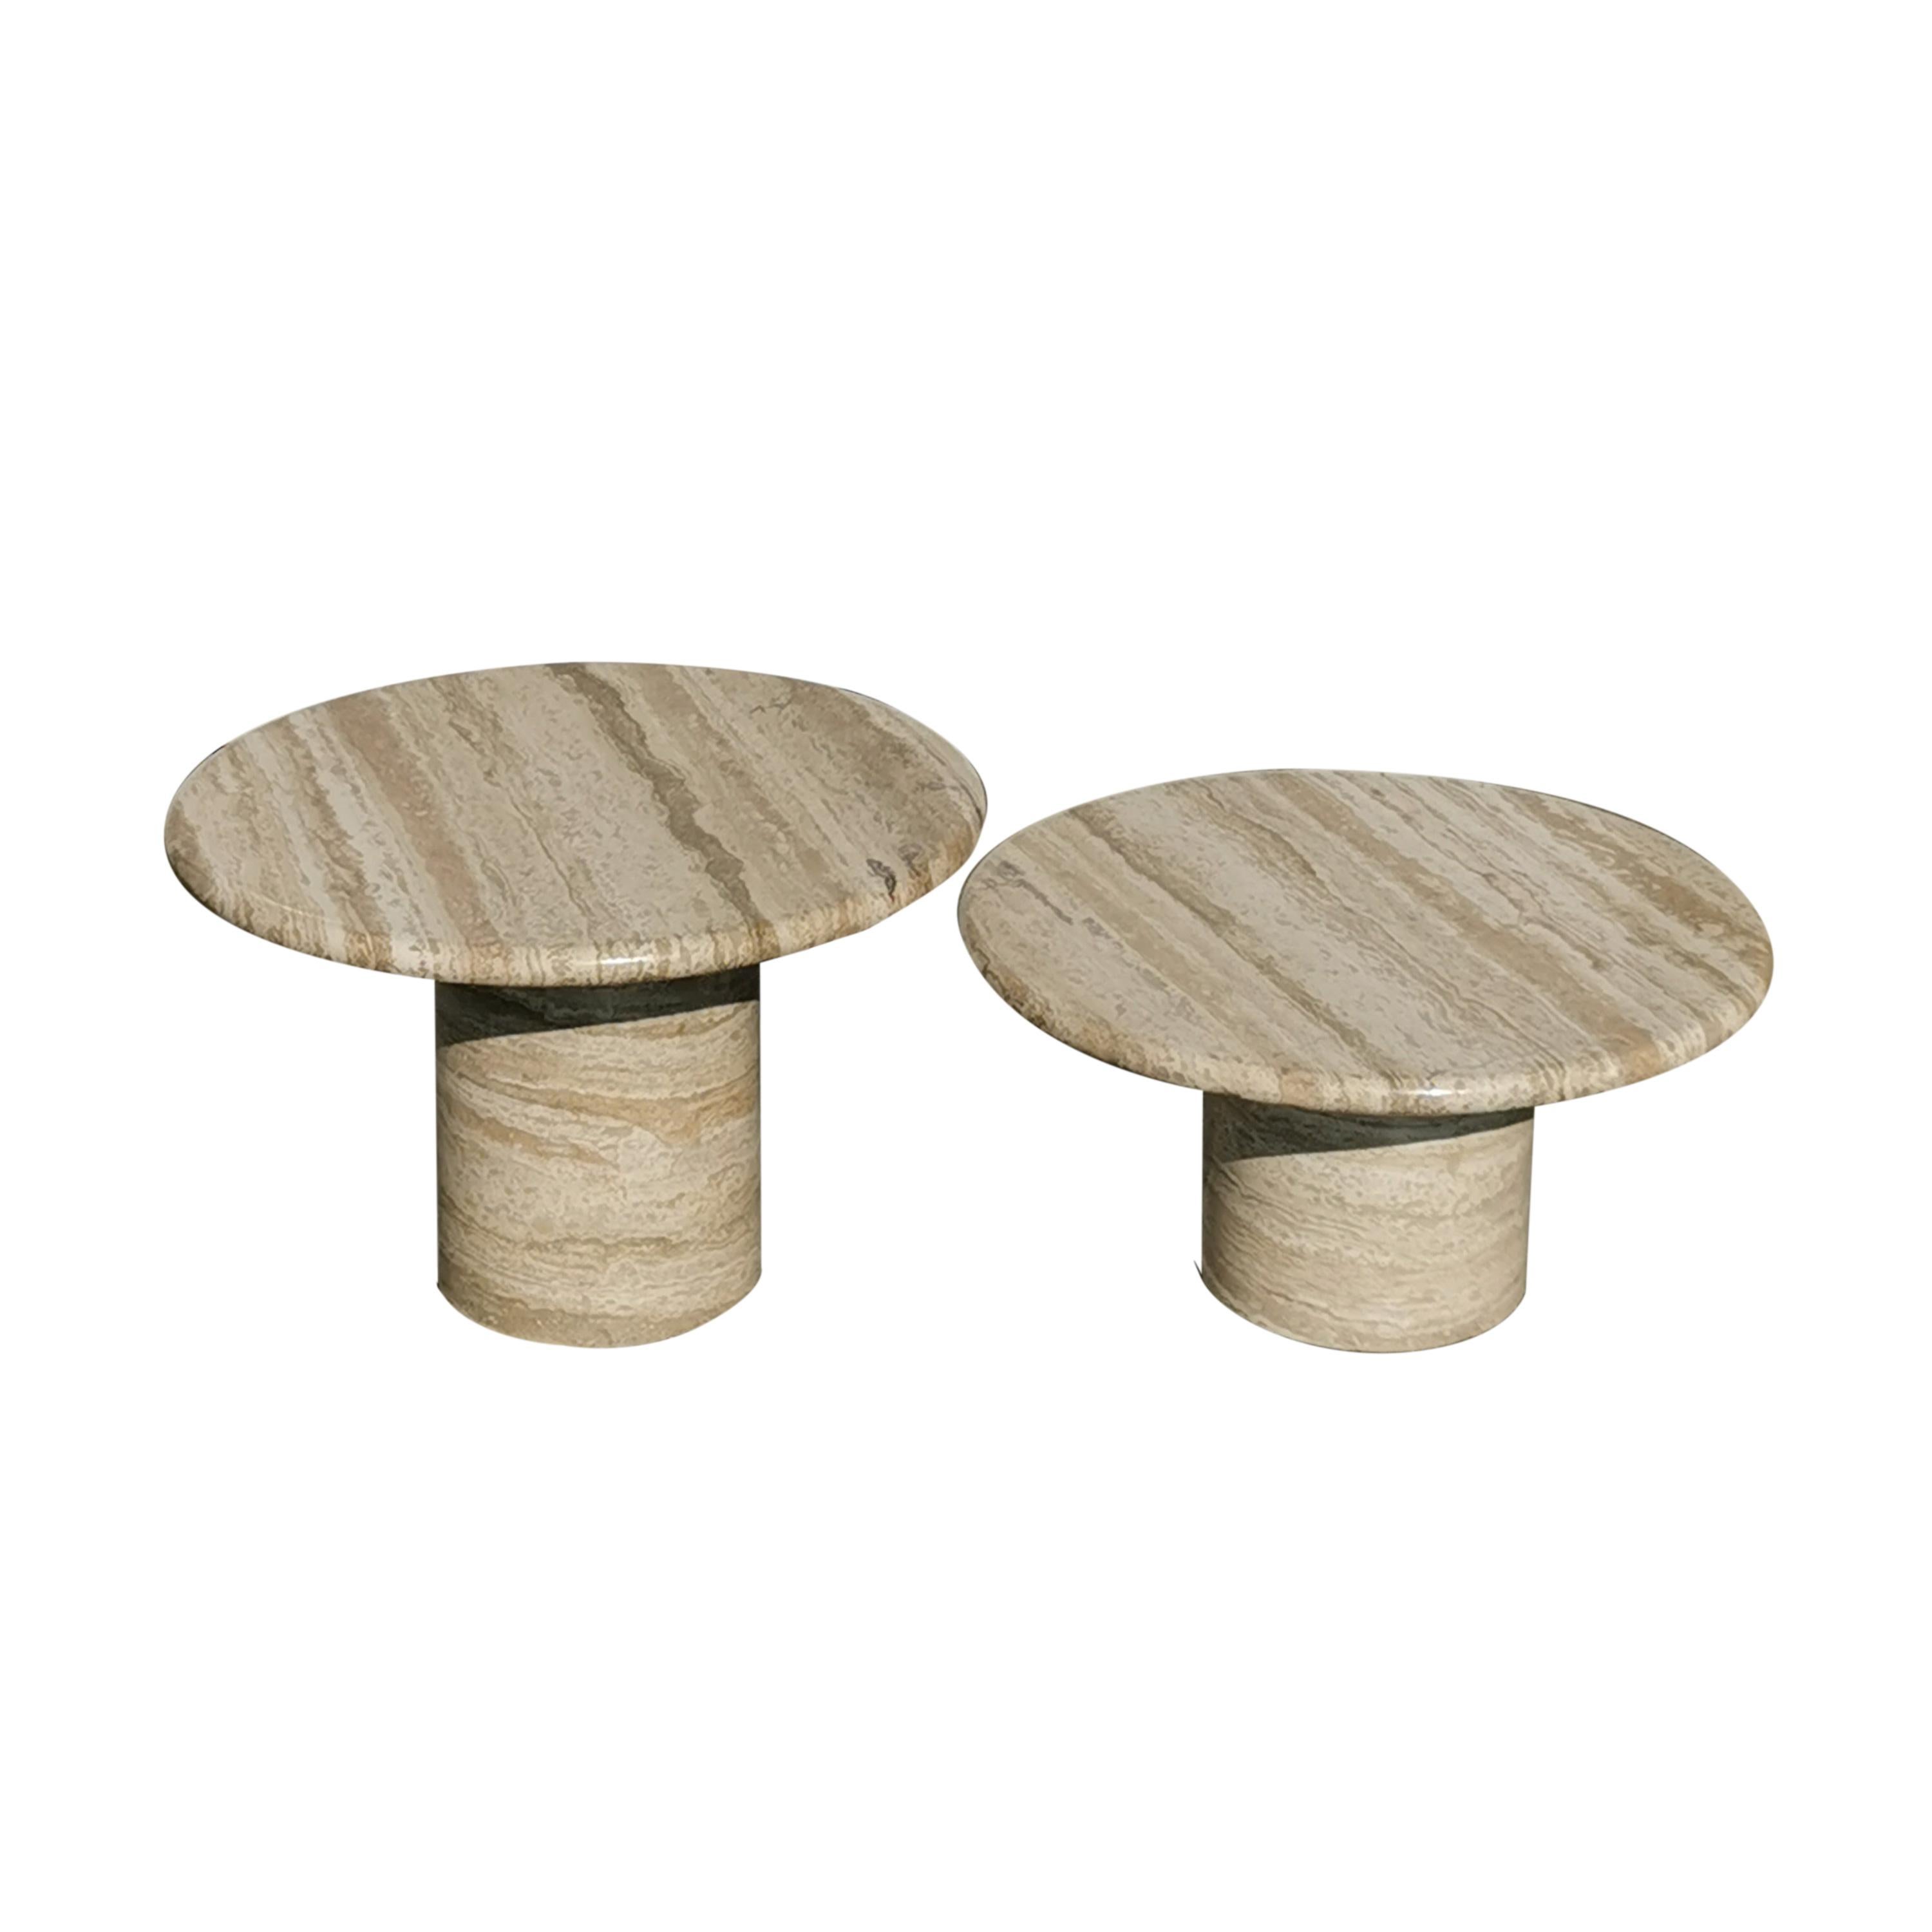 Set of two cream travertine coffee tables.
Round top with gently curved edge, resting on a cylindrical pedestal leg.
Made in Italy during the seventies.
The puristic play of the volumes make this set timeless.
Very nice condition.